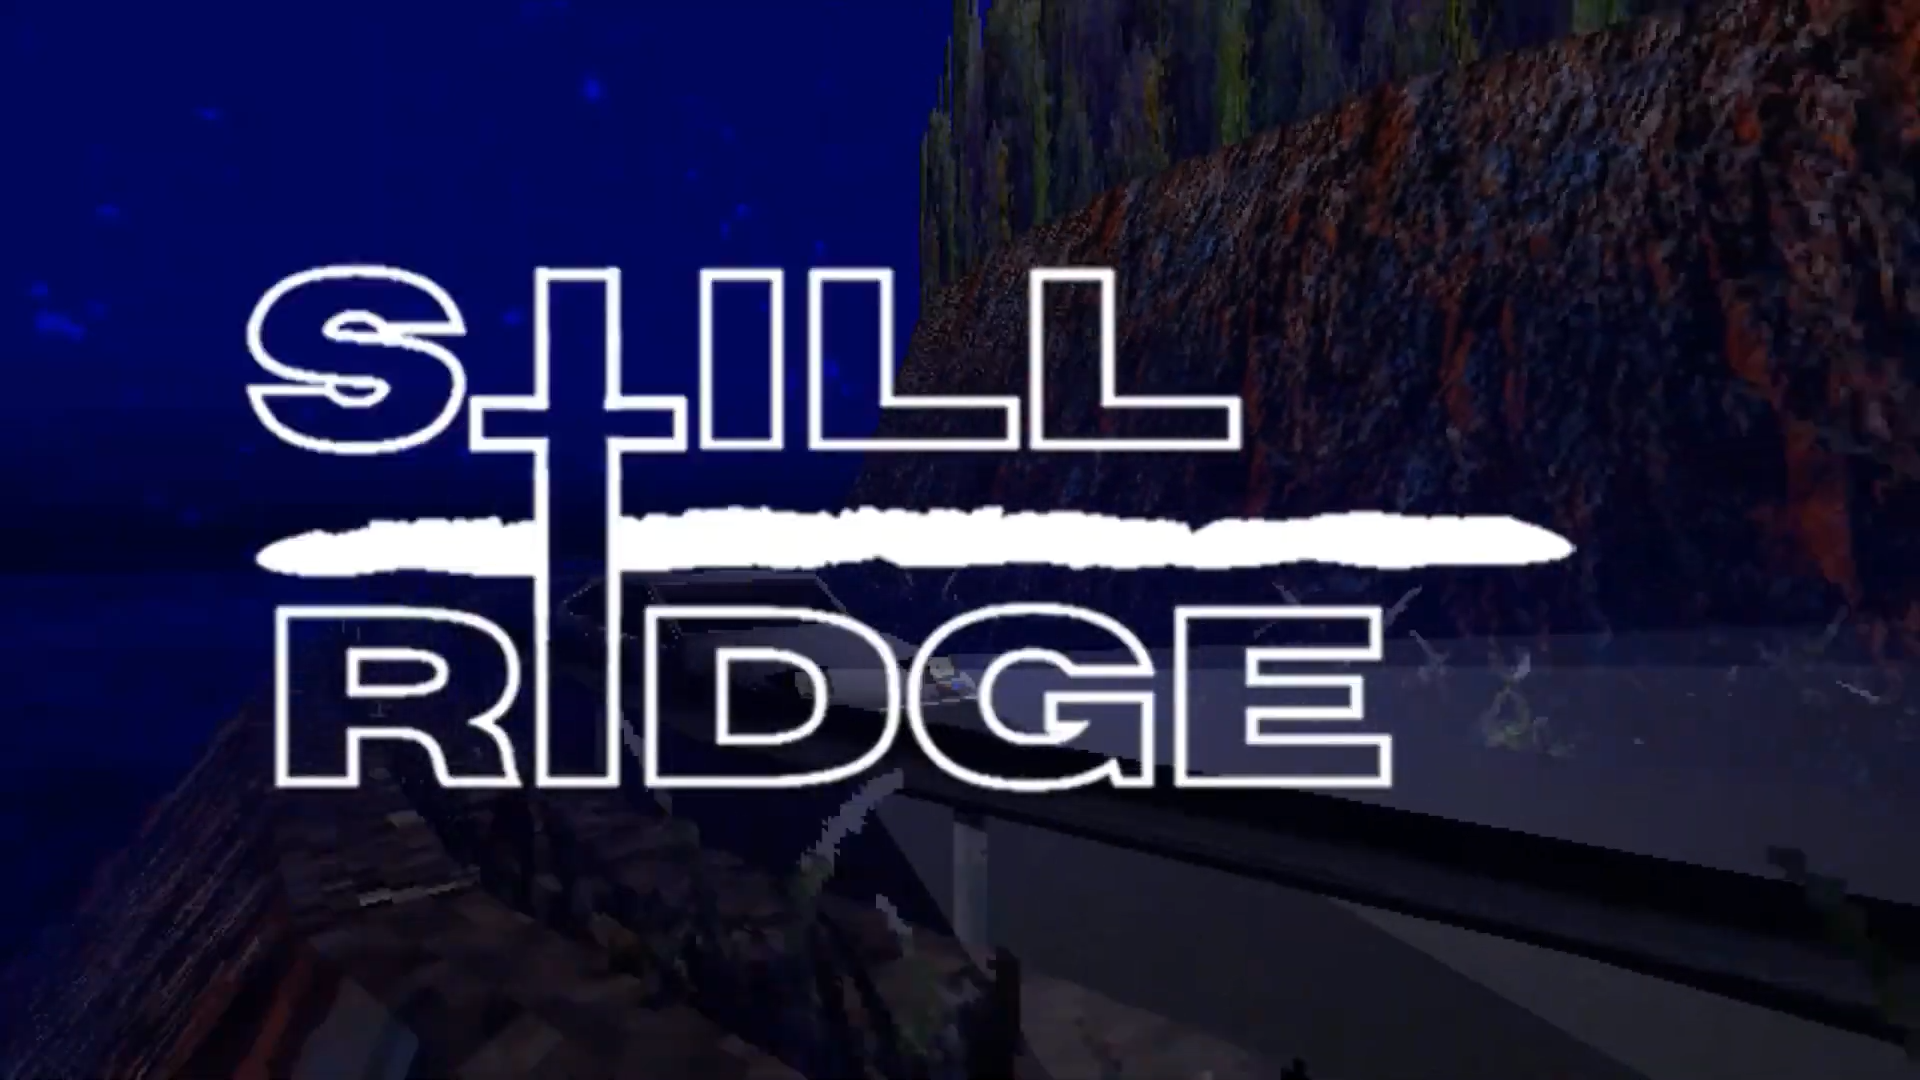 Ending title card from the prologue for still ridge